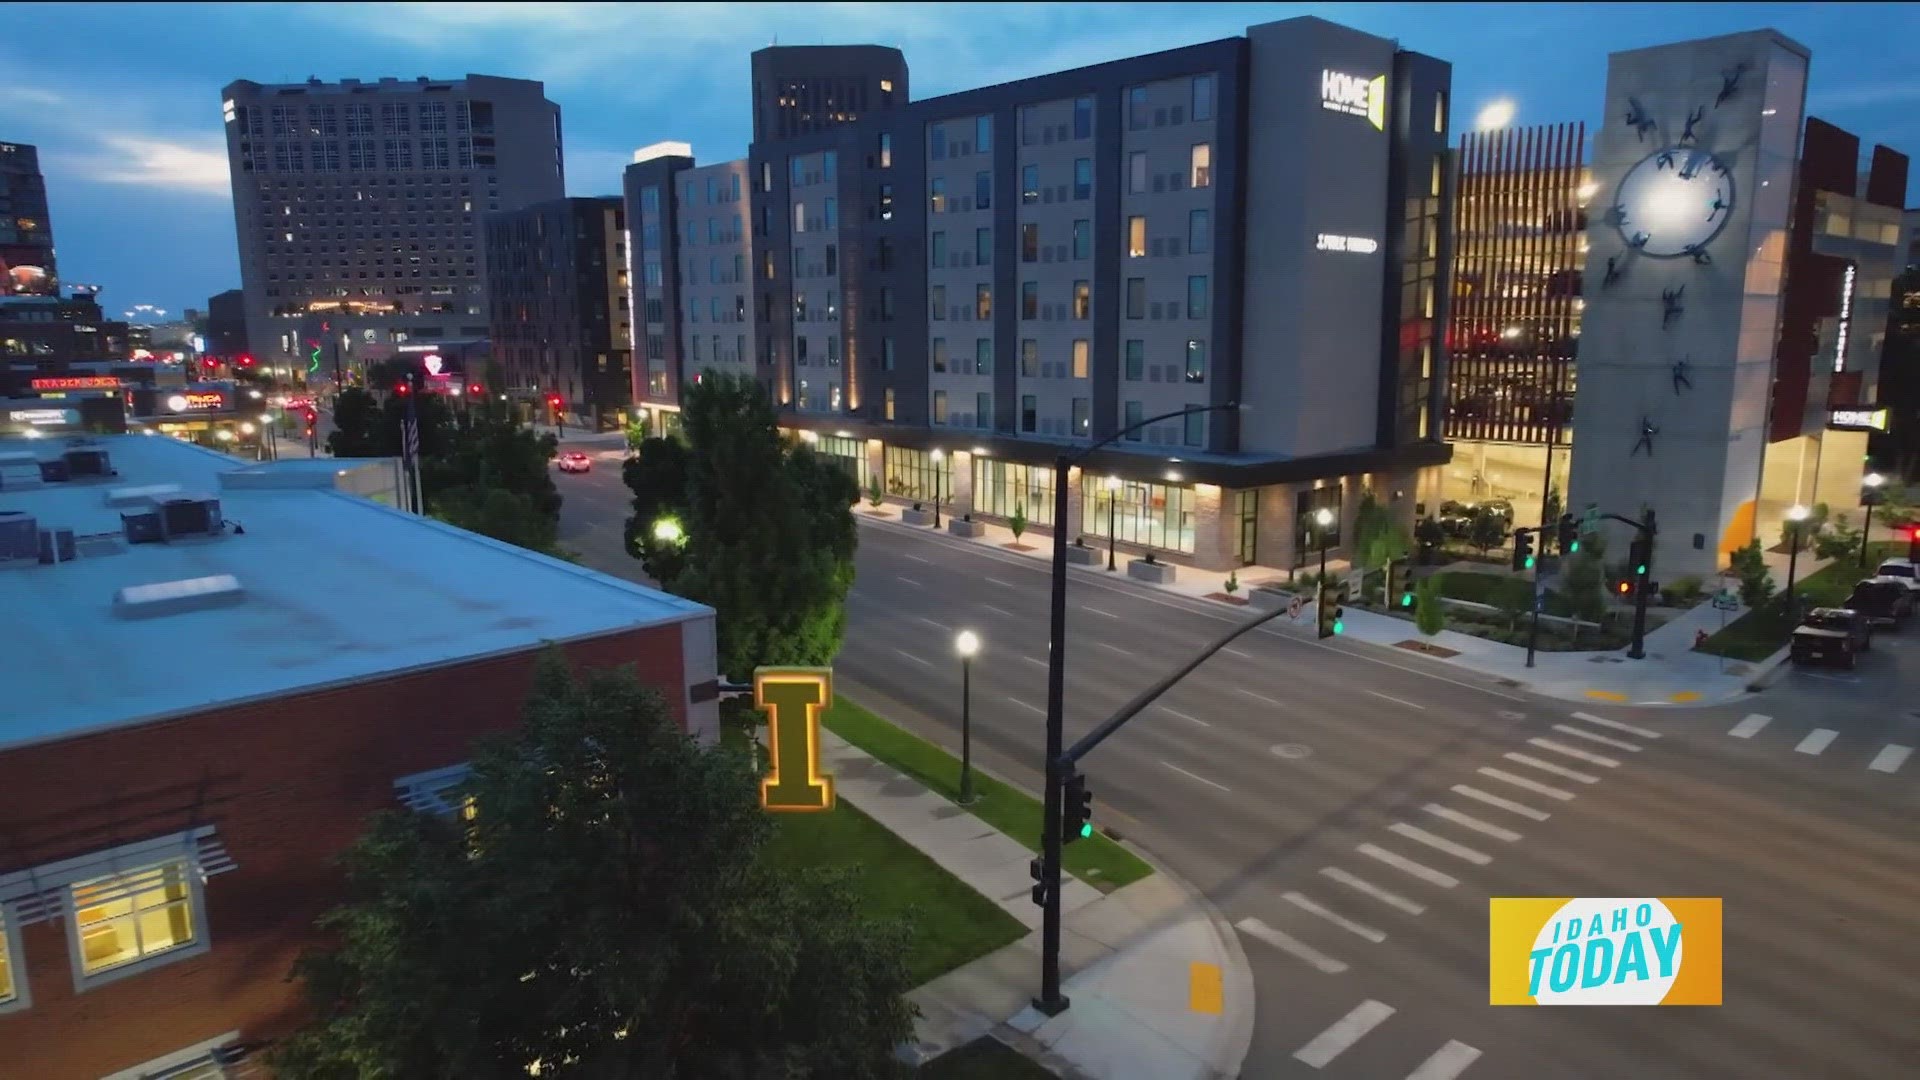 University of Idaho is calling all Vandals to gather downtown Boise at their new campus location to show their pride. Idaho Today's Mellisa Paul gets the details.